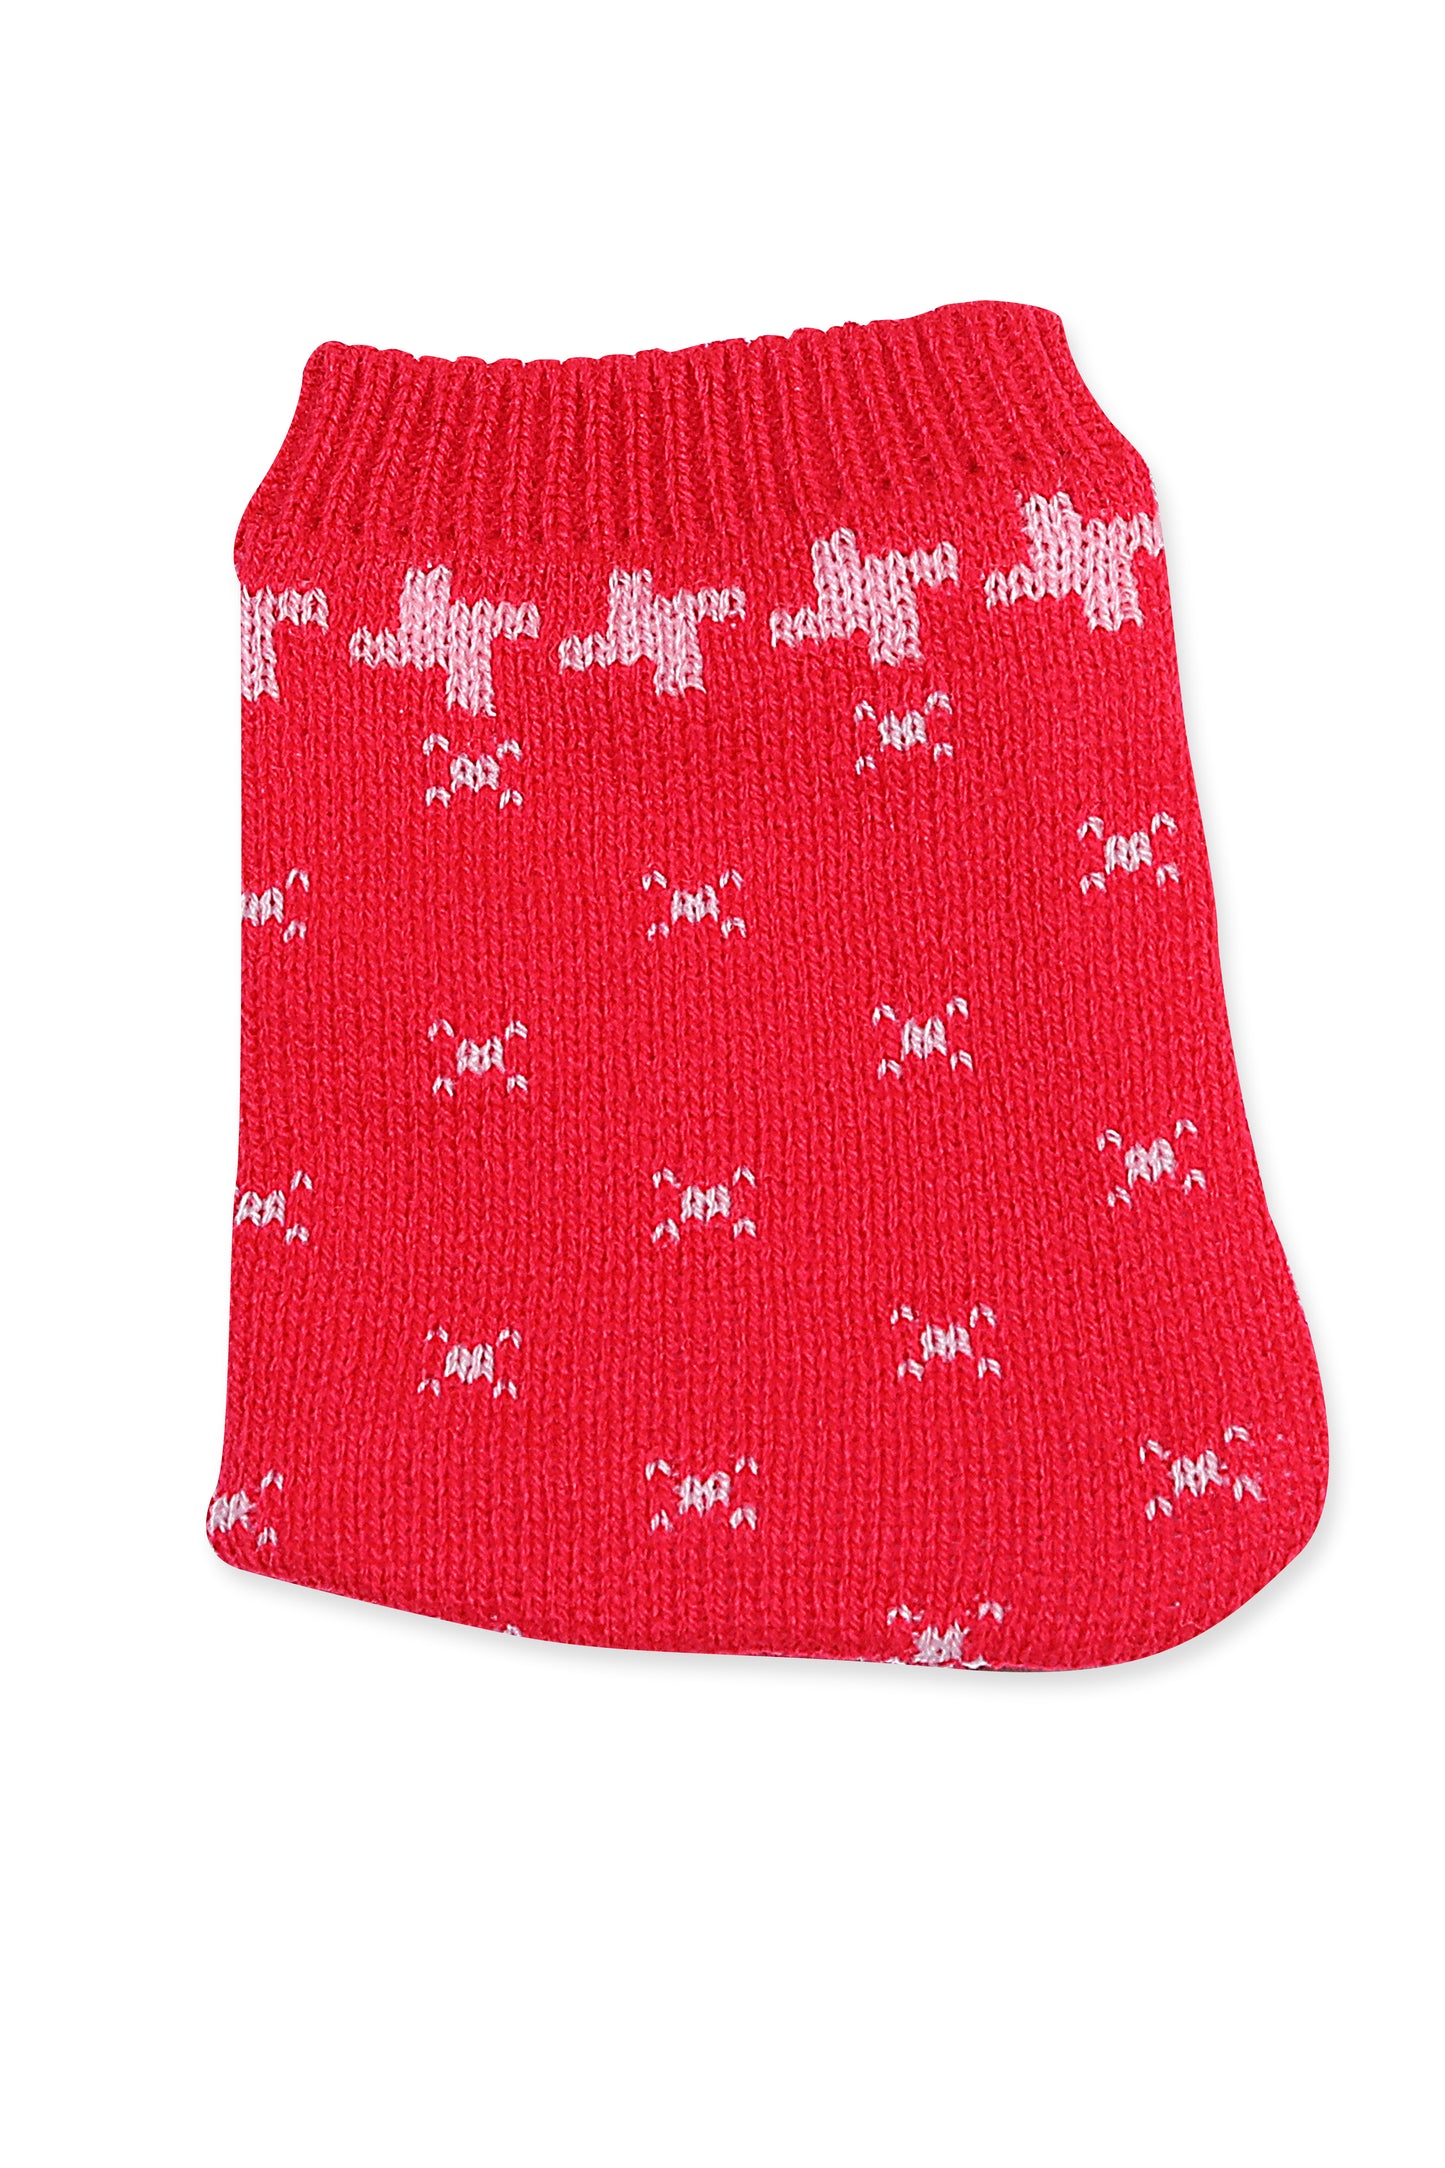 Baby Knitted Sweater, Leggings, Cap & Booties Full Suit- ABC 123 (4 Pcs) Strawberry